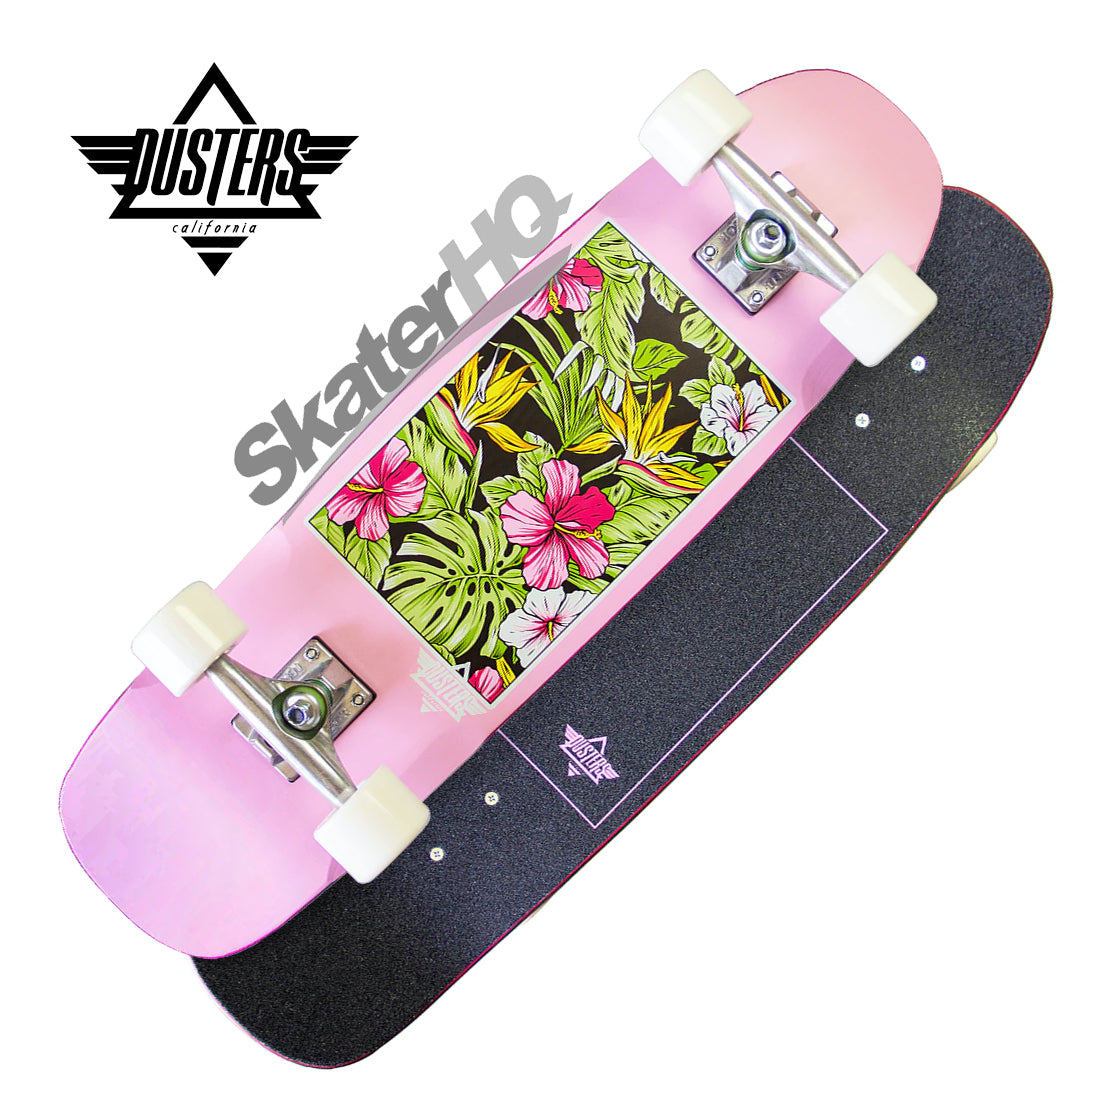 Dusters Tropic Cruiser 7.75x29 Complete - Pink Skateboard Compl Cruisers